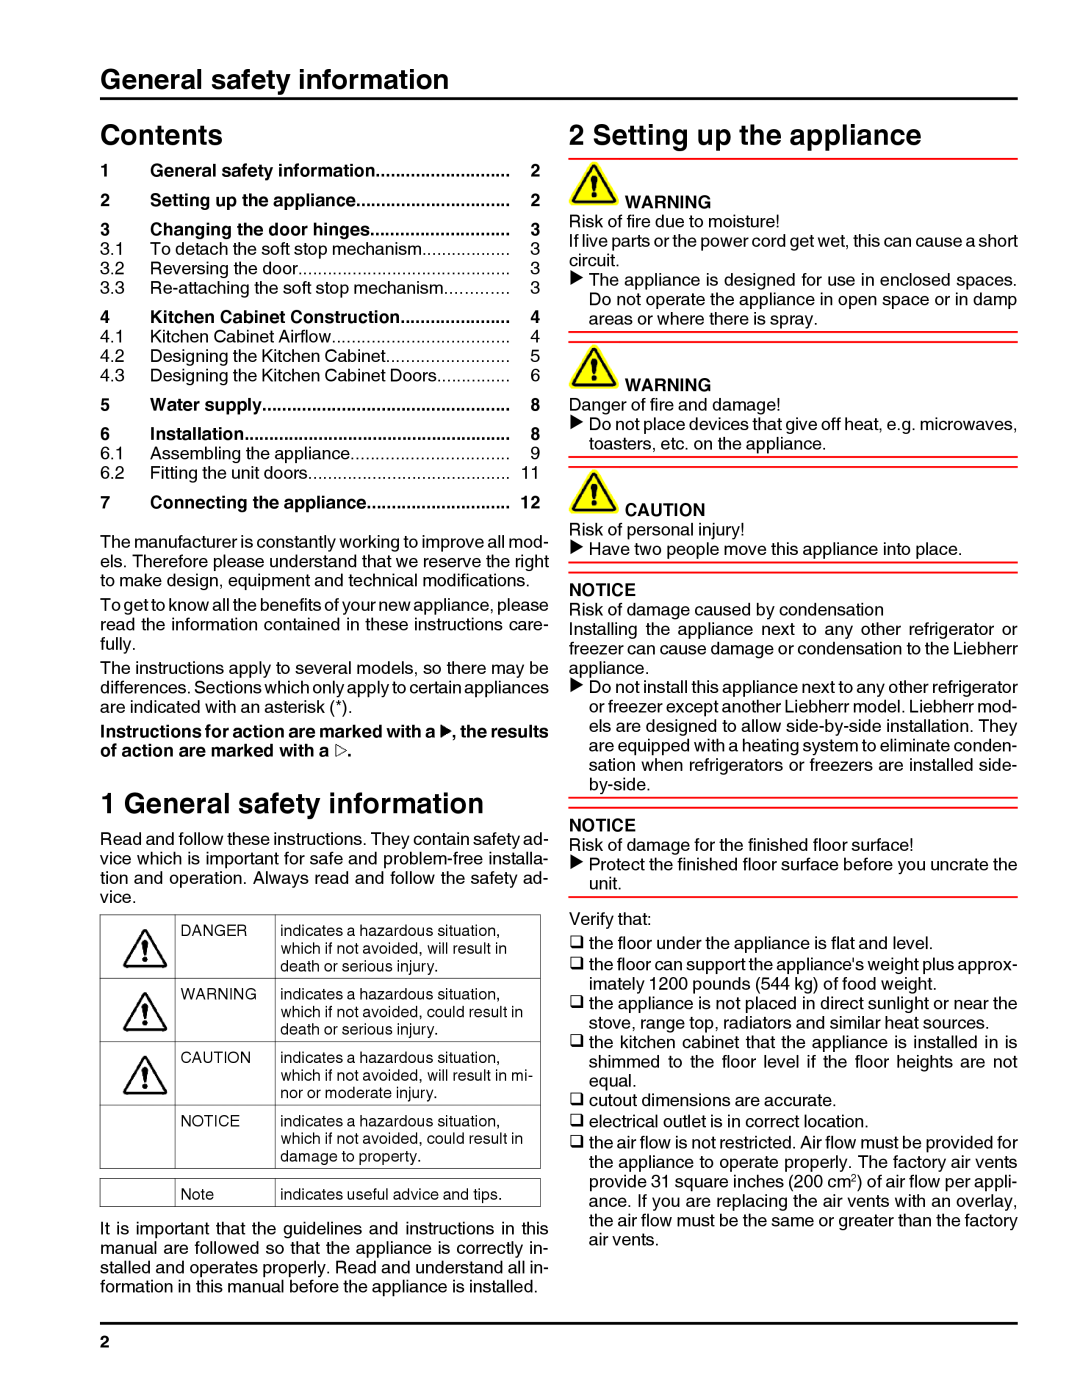 Liebherr HC1011, HC1060 General safety information, Contents, Setting up the appliance, Changing the door hinges 